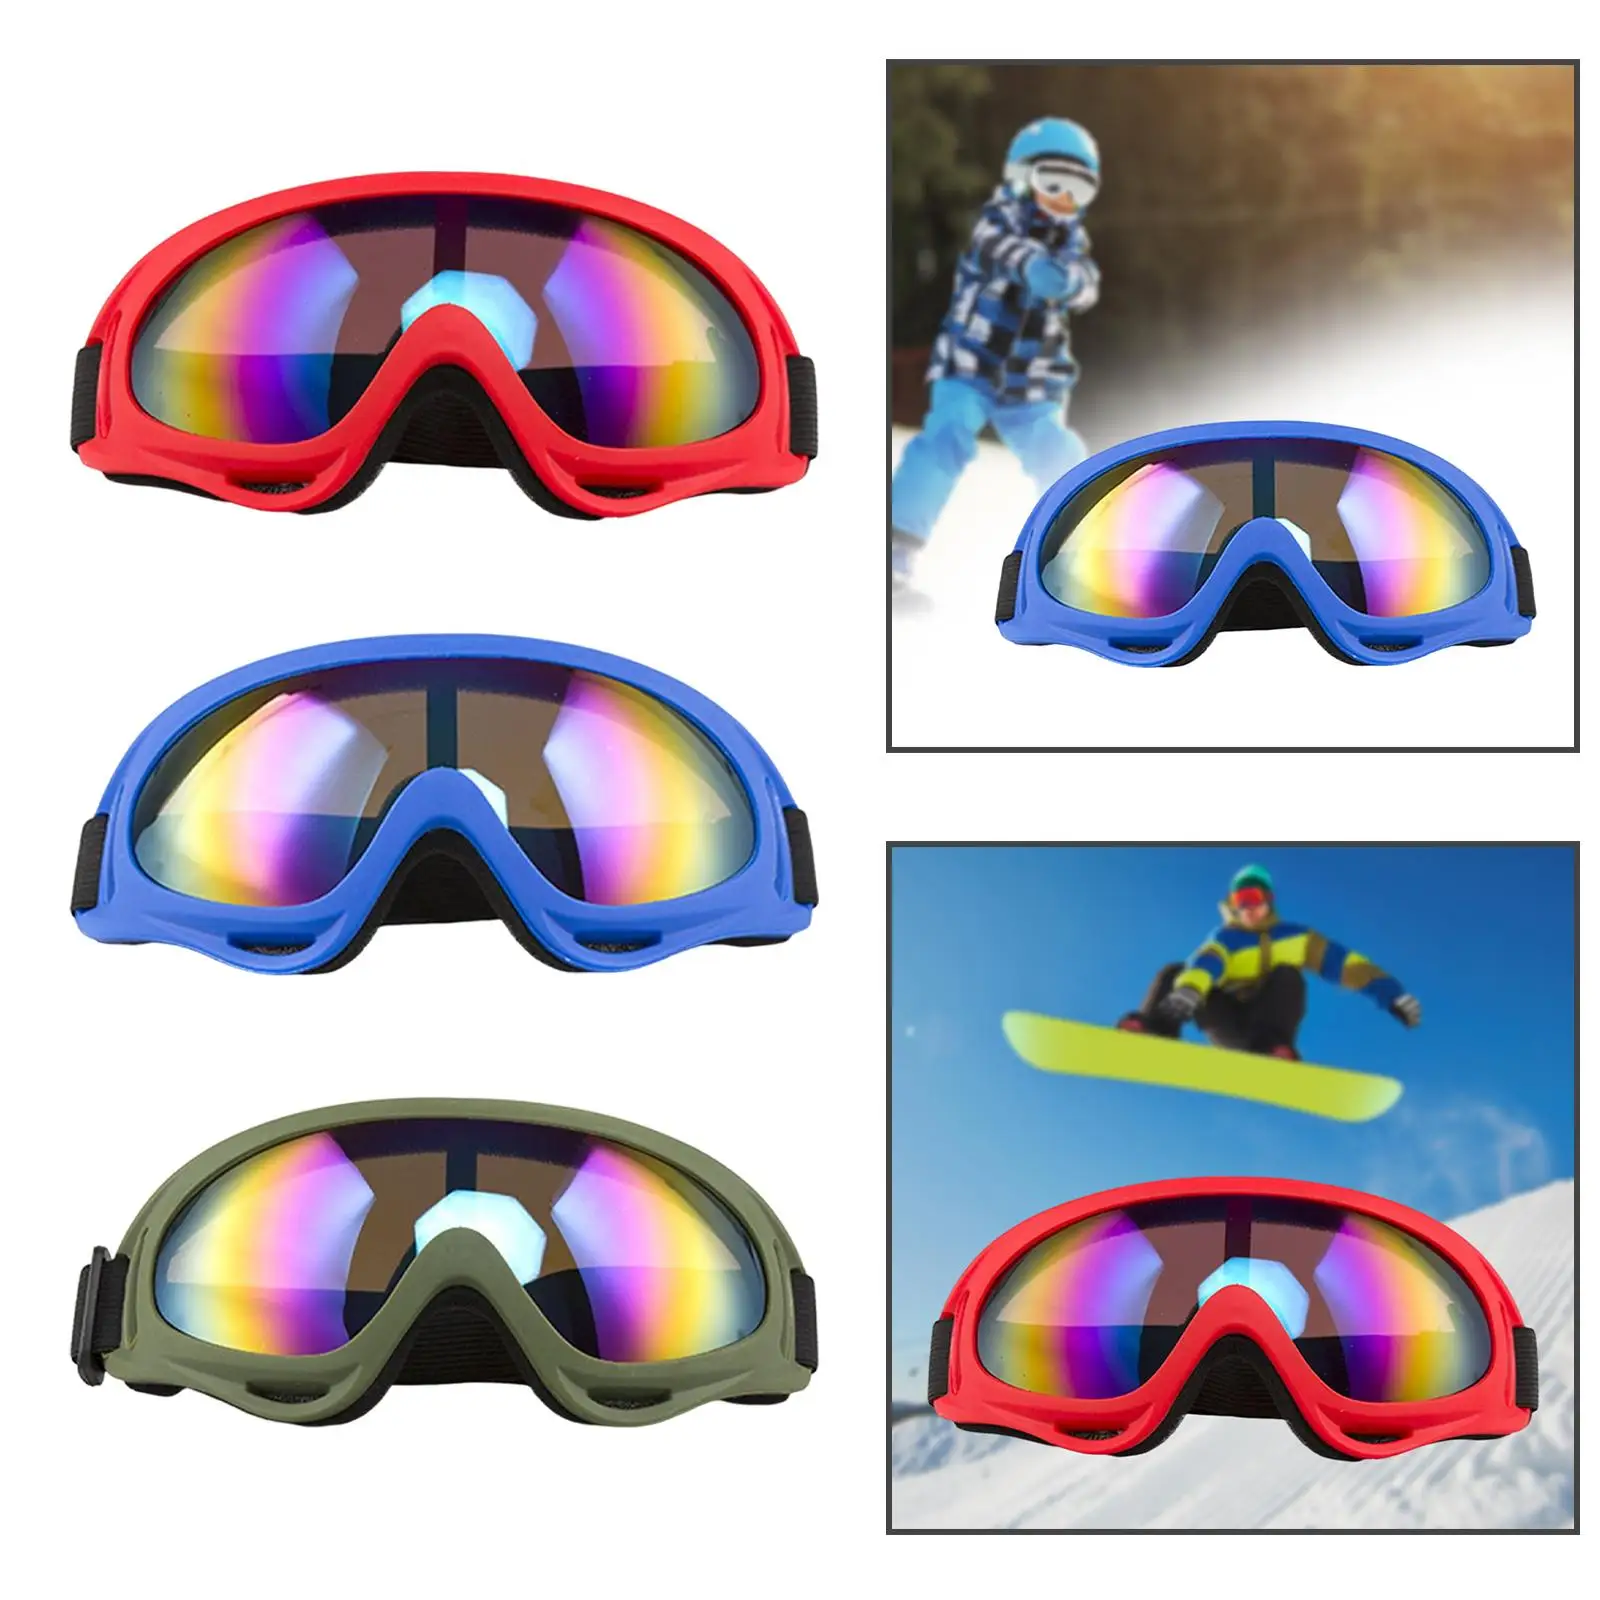 Outdoor Sports Ski Goggles with Adjustable Strap Windproof for Adult Skating